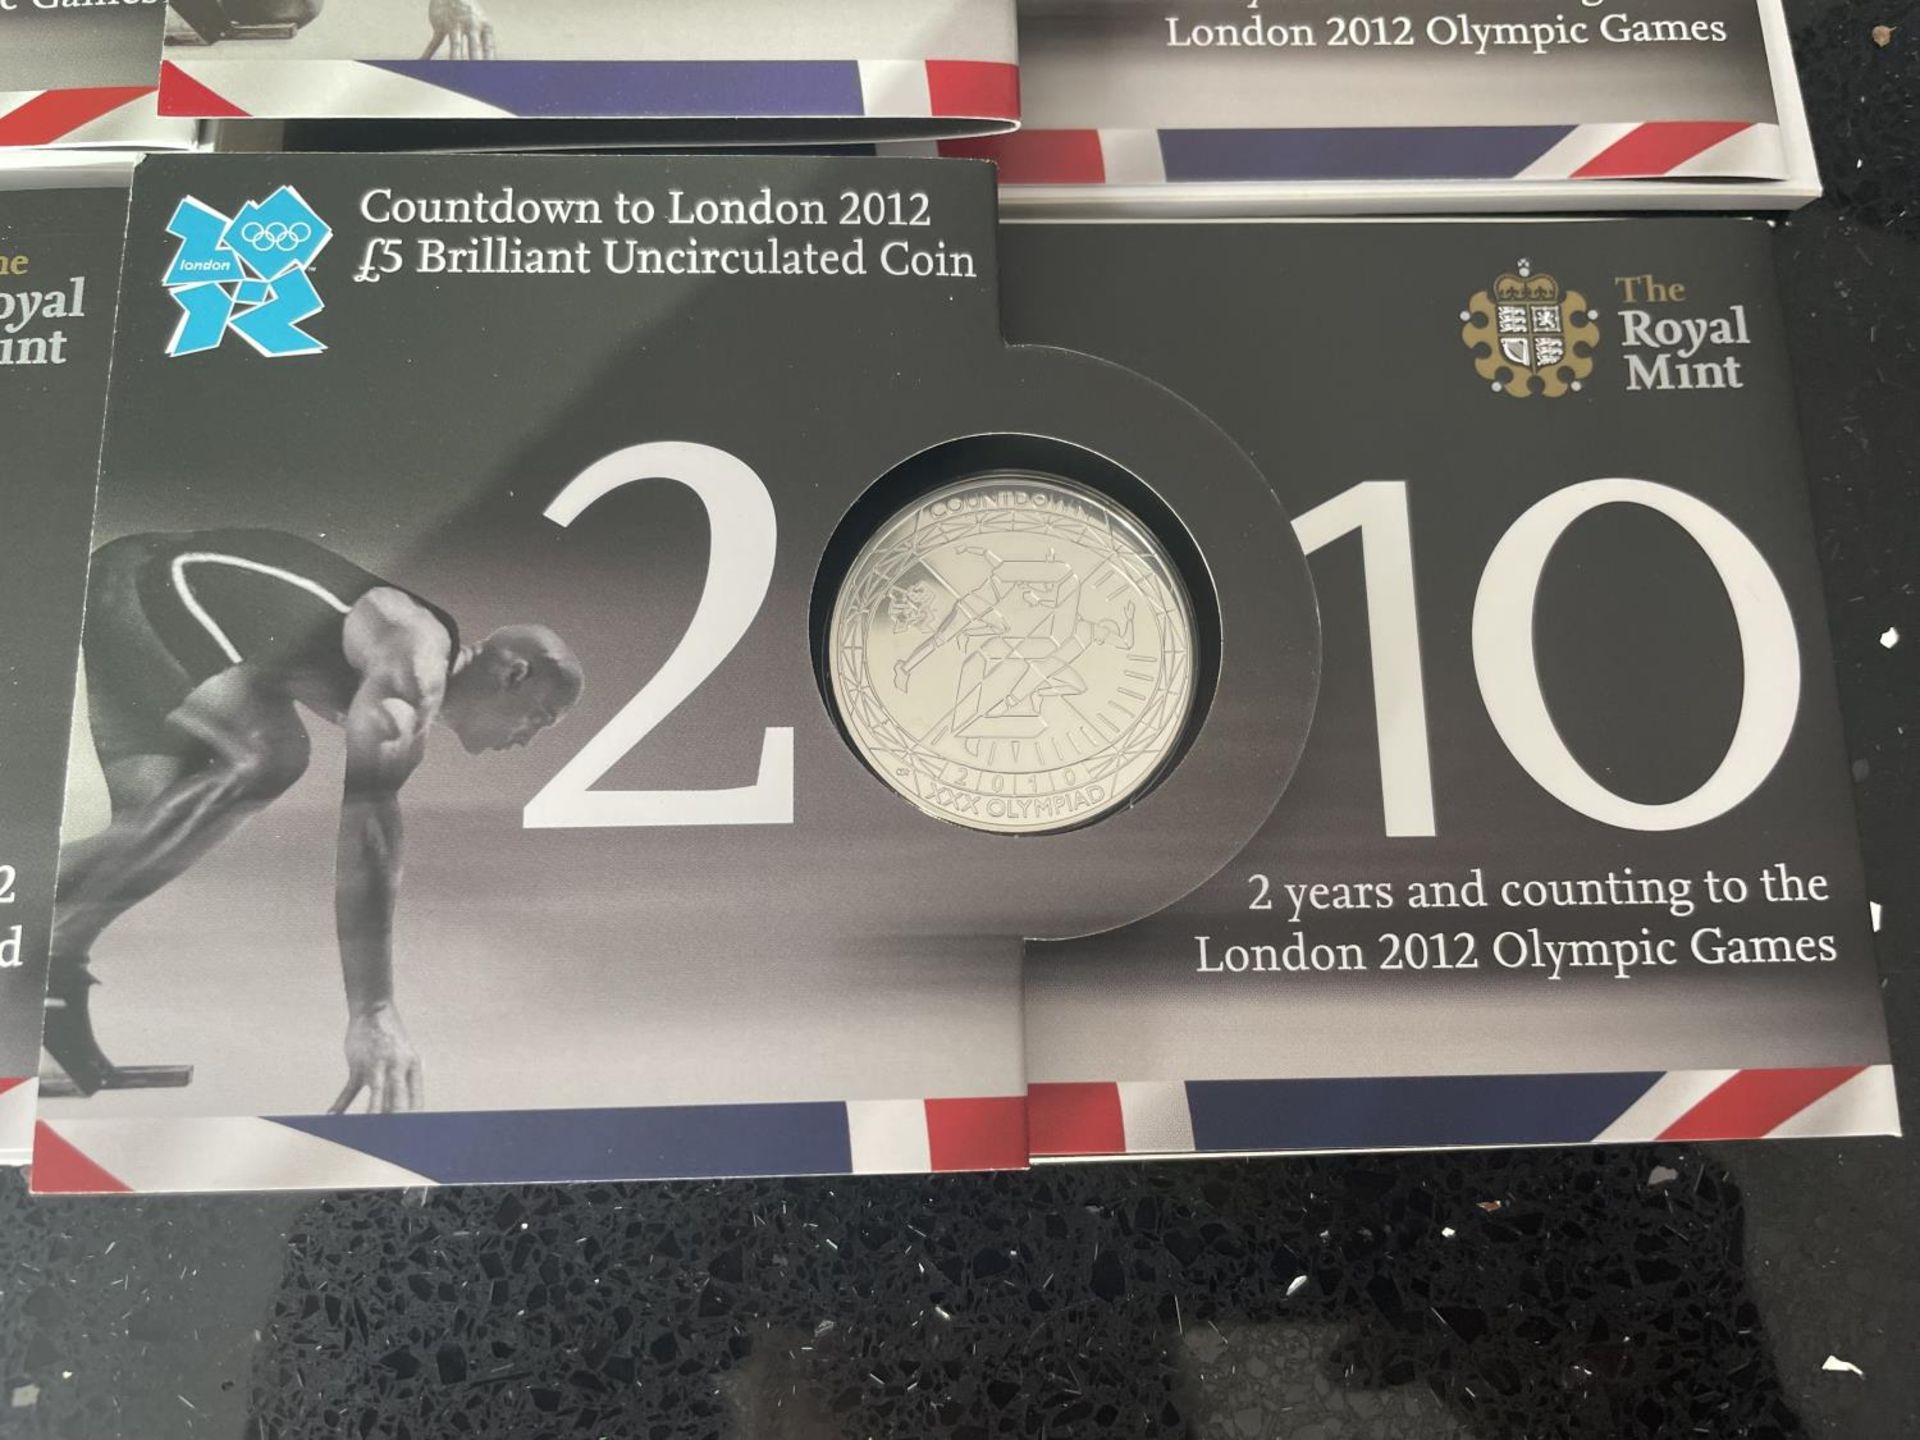 THE COMPLETE COLLECTION “COUNTDOWN LONDON 2012” 4 X £5 BRILLIANT, UNCIRCULATED COINS - Image 5 of 8